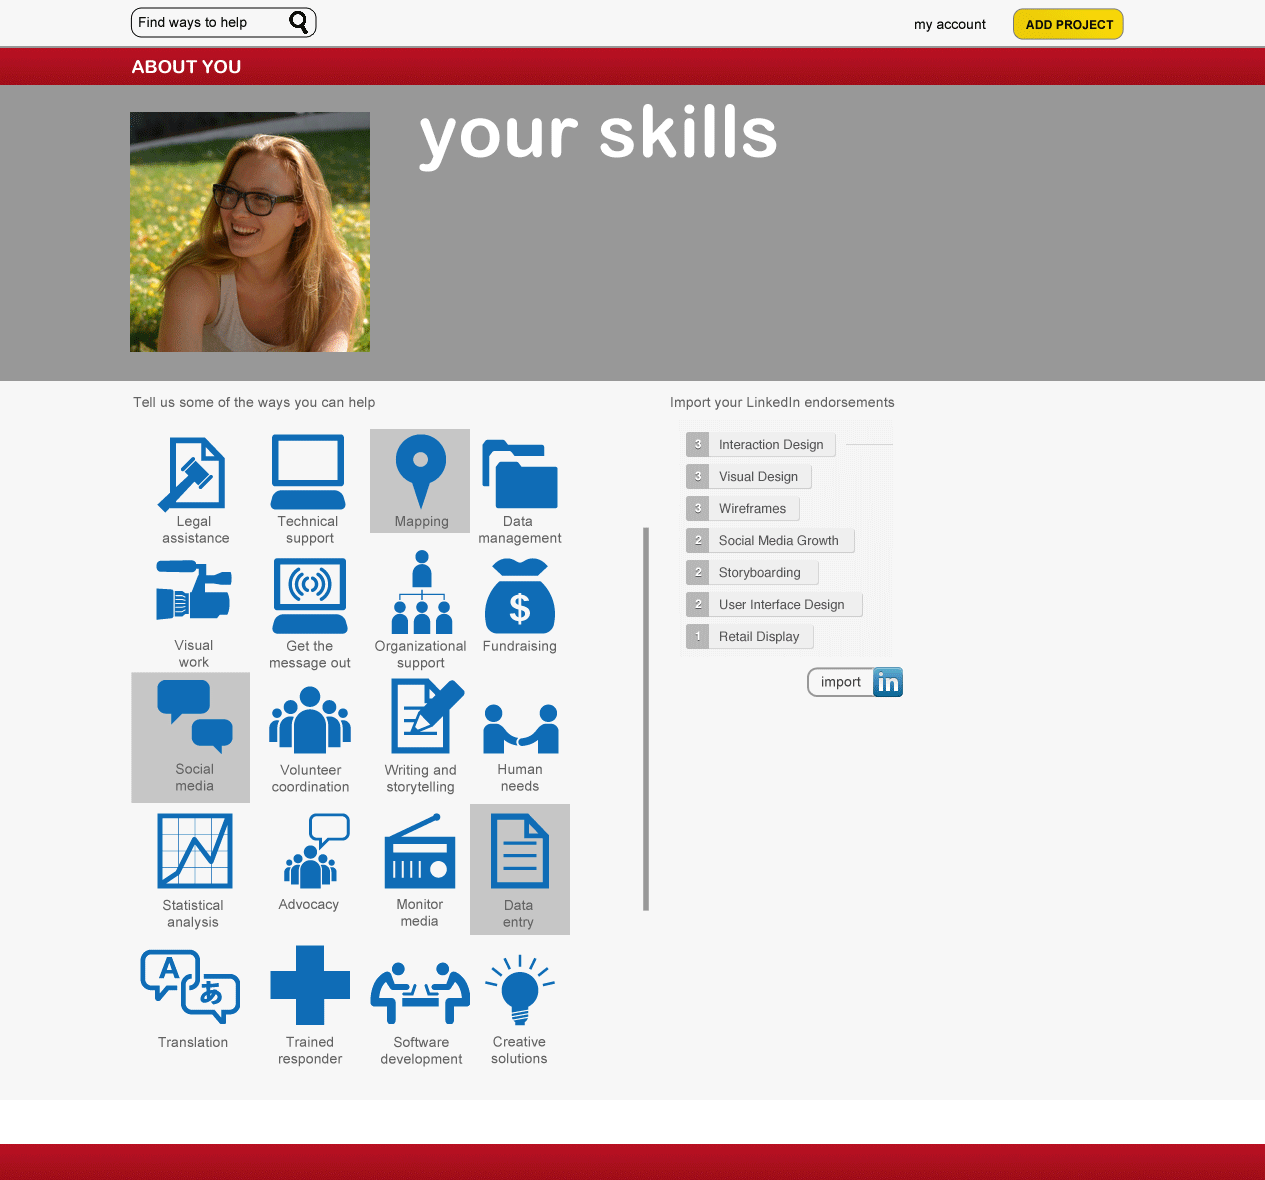 The skills selection and importing prototype